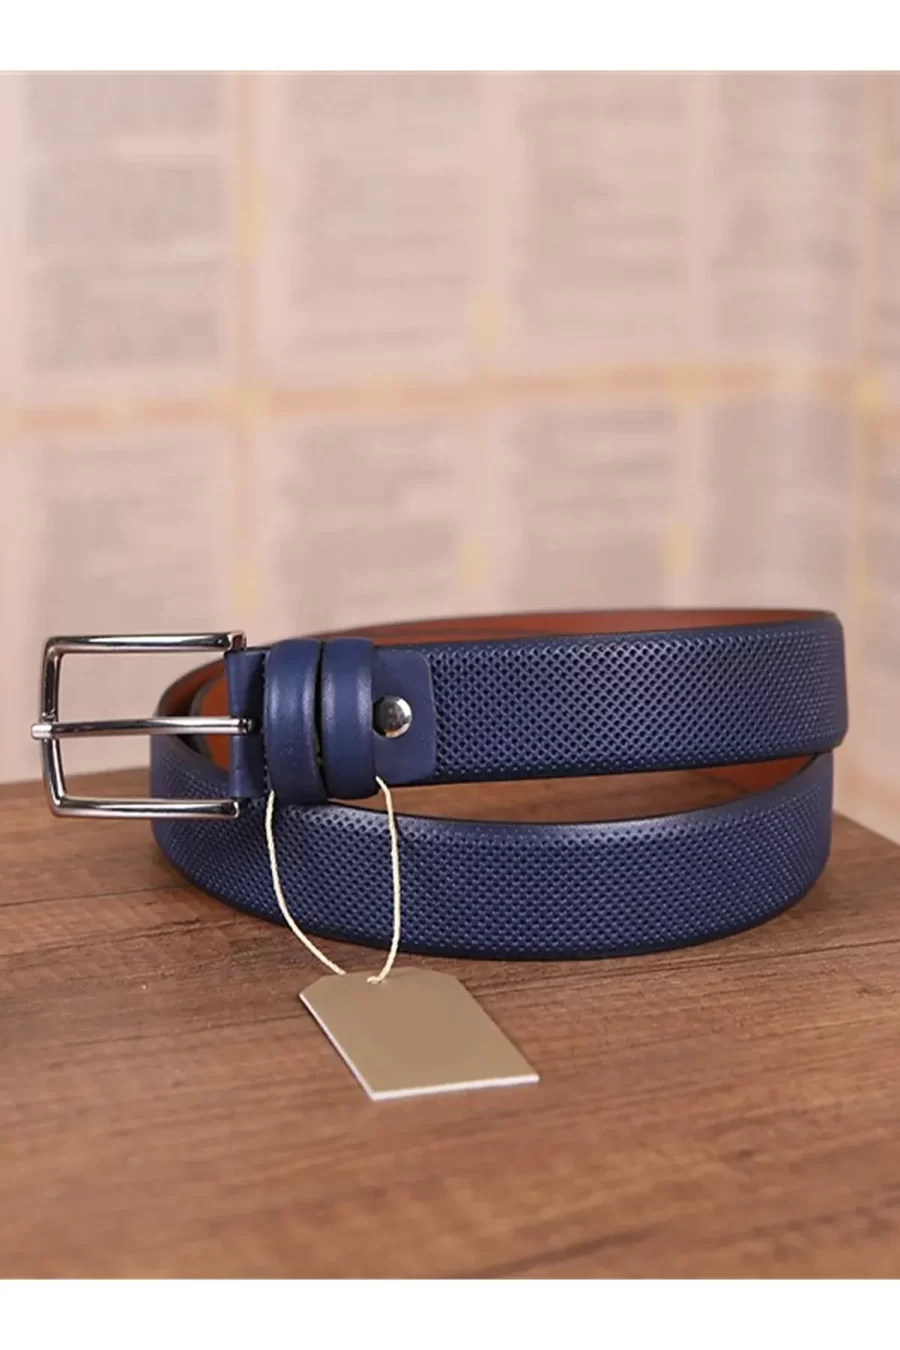 Blue Mens Belt For Trousers Perforated KSV 00 6